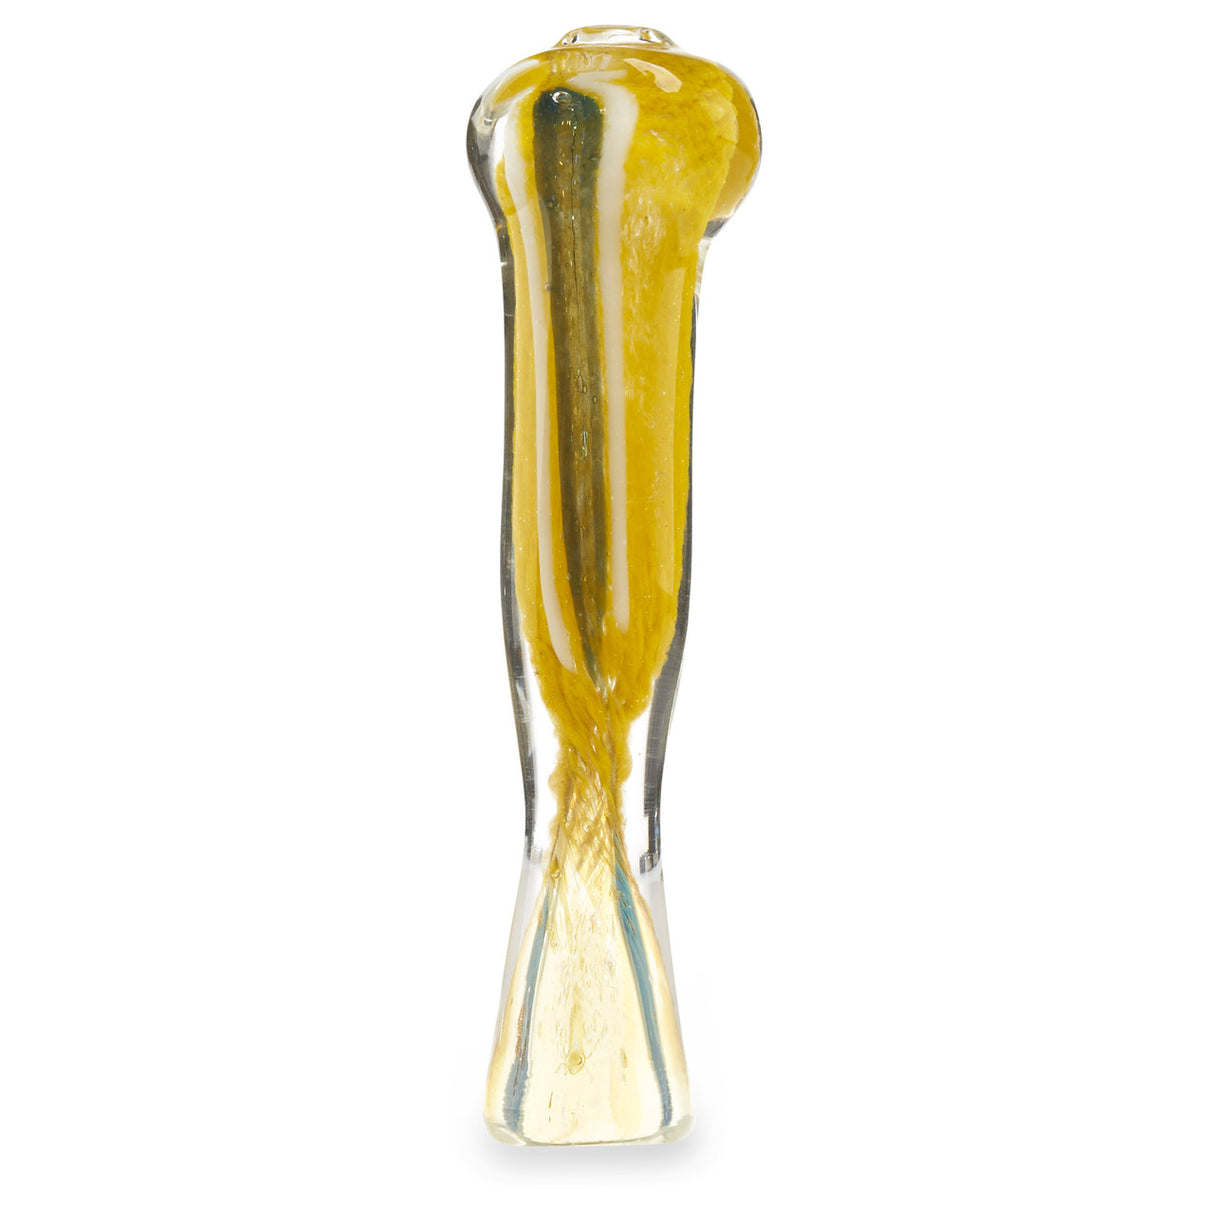 dope small glass chillum one hitter pipe for dry herb